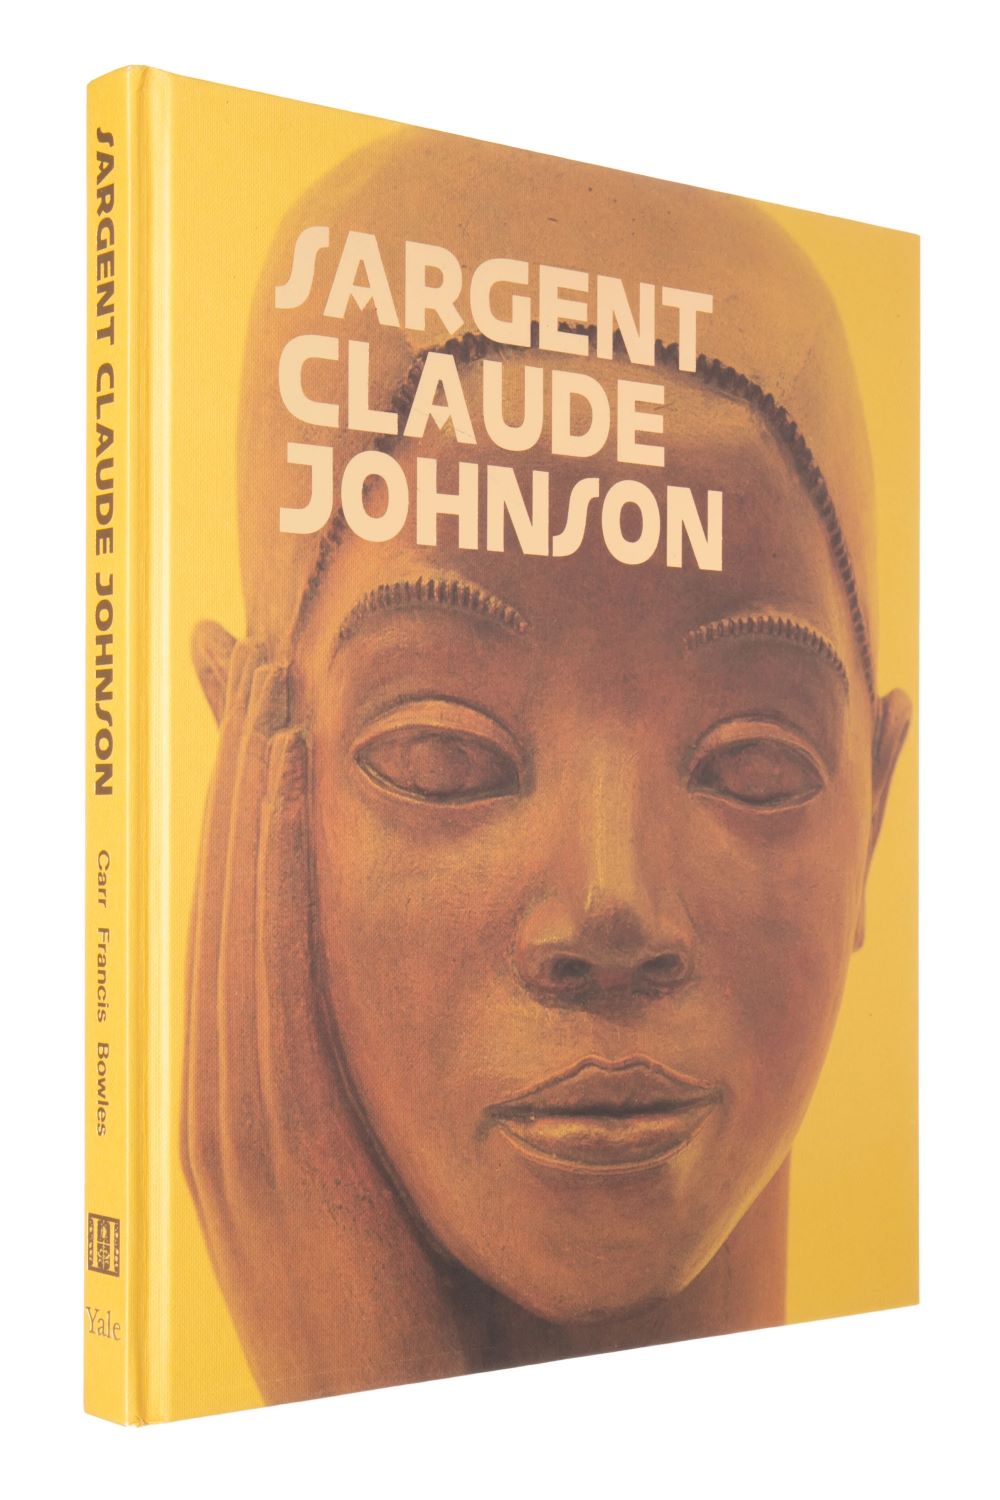 Book cover with an image of a terracotta face sculpture and the title “Sargent Claude Johnson.”